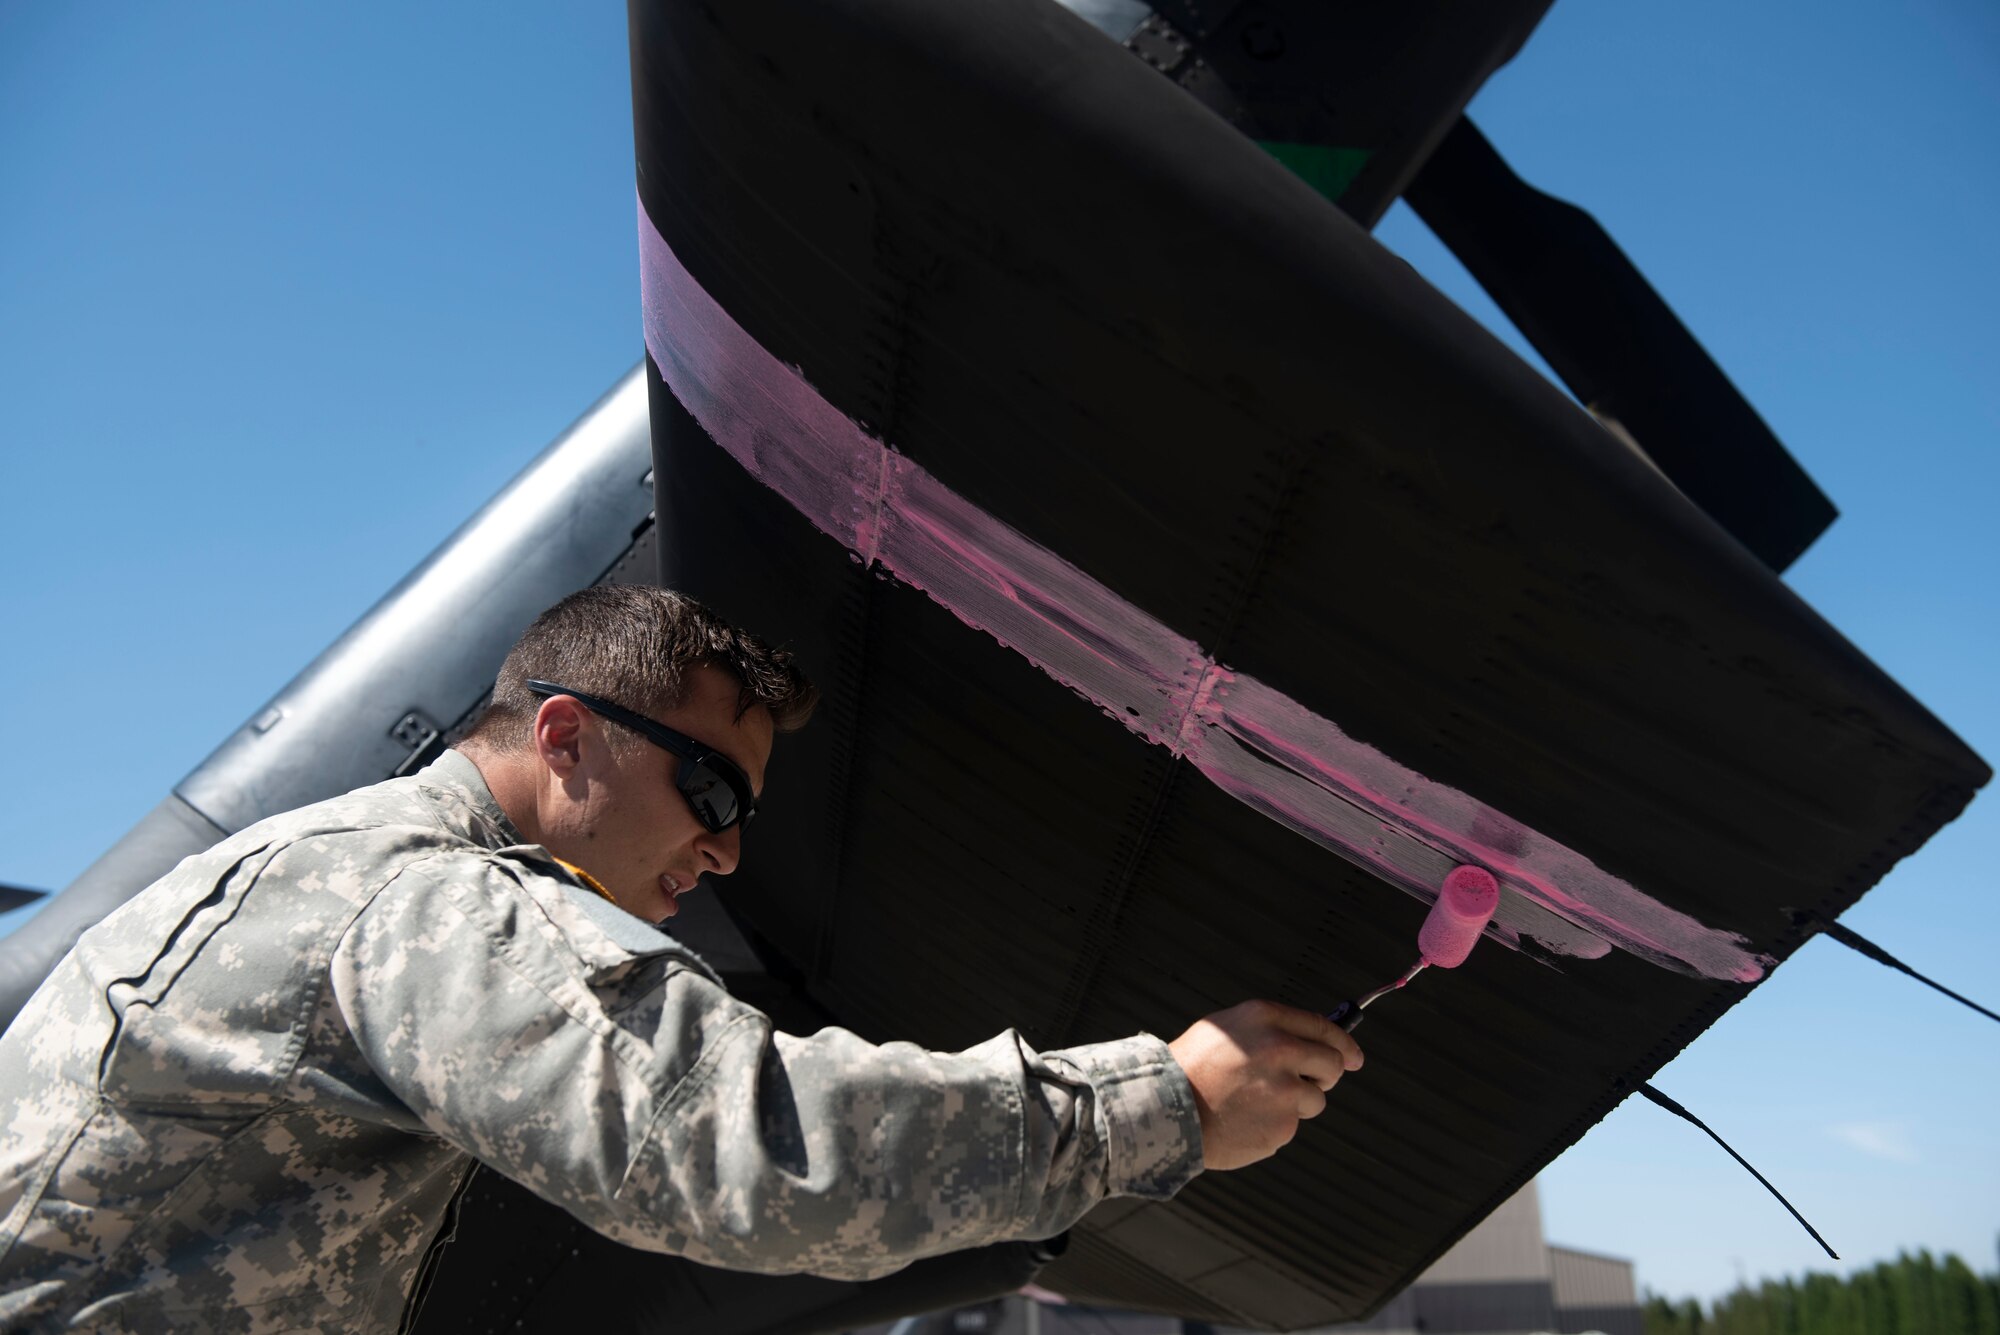 U.S. Army SGT. William Hust, 96th Aviation Troop Command crew chief assigned to Joint Base Lewis-McChord, paints the tail of a Sikorsky UH-60 Blackhawk helicopter at Fairchild Air Force Base, Washington, Aug. 1, 2018. Two Washington National Guard Blackhawks were staged at Fairchild to fight the wildfire dubbed “The Sheep Creek Fire.” By painting the helicopters with pink-colored paint, the helicopters are more visible to ground crews they’re supporting. (U.S. Air Force photo/Airman 1st Class Whitney Laine)